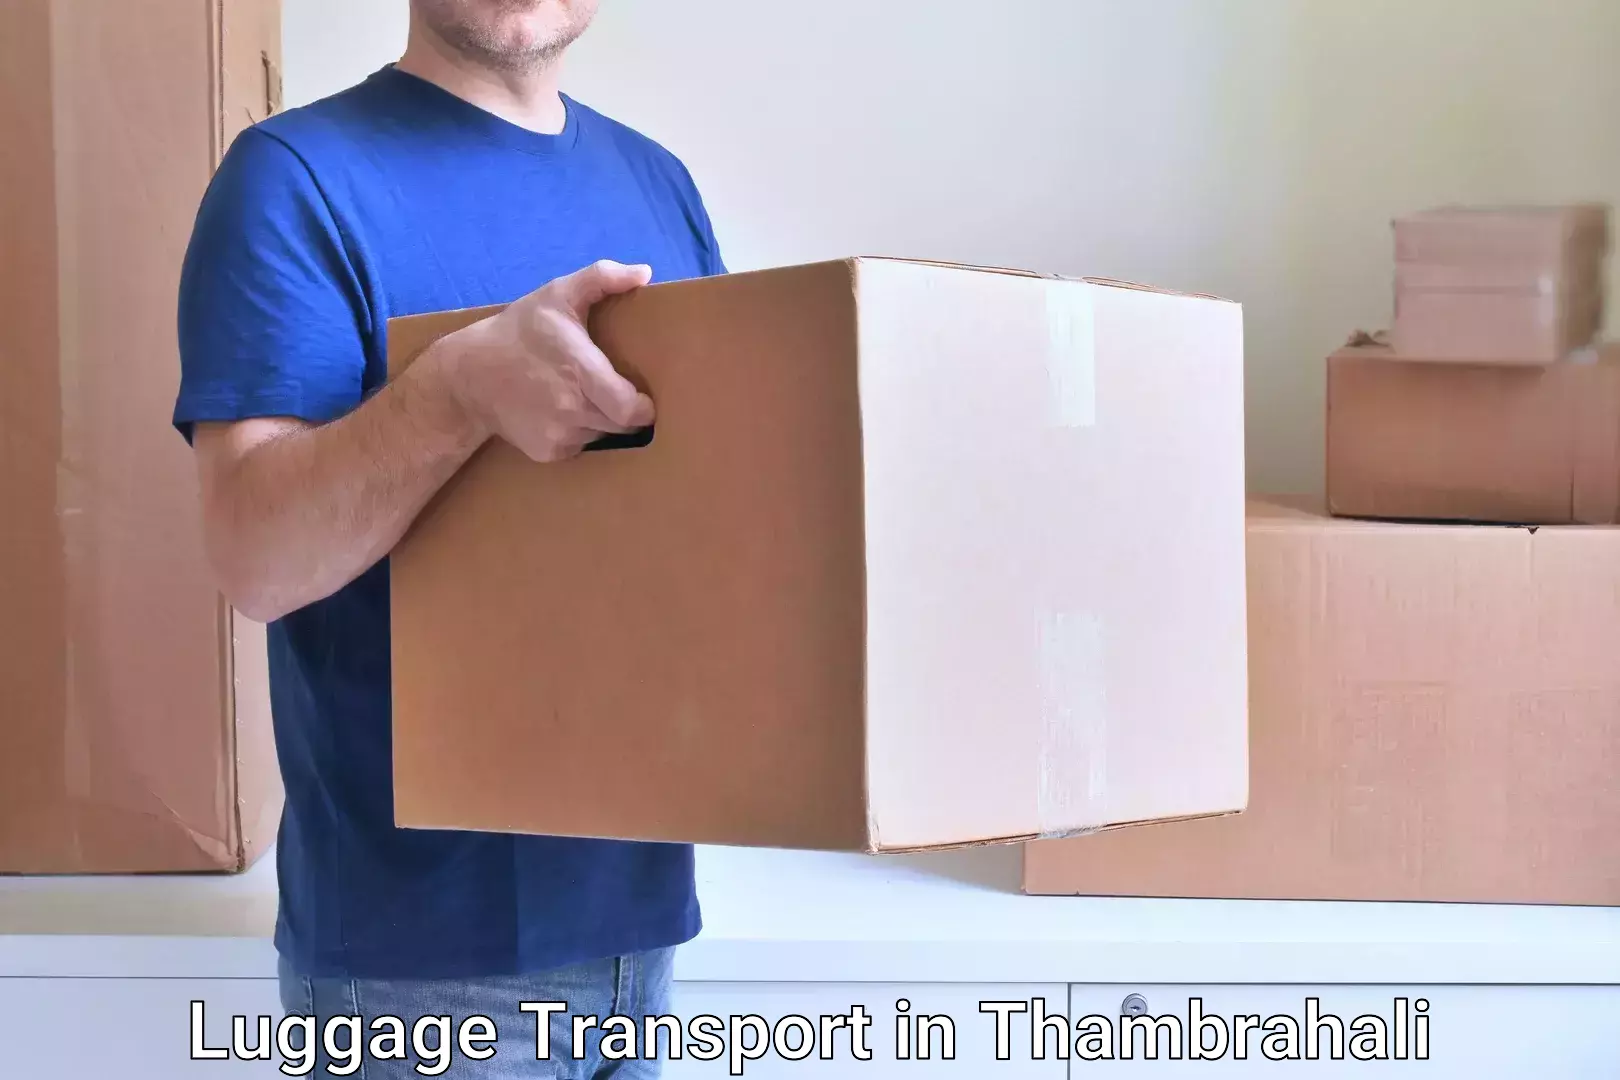 Luggage transport pricing in Thambrahali